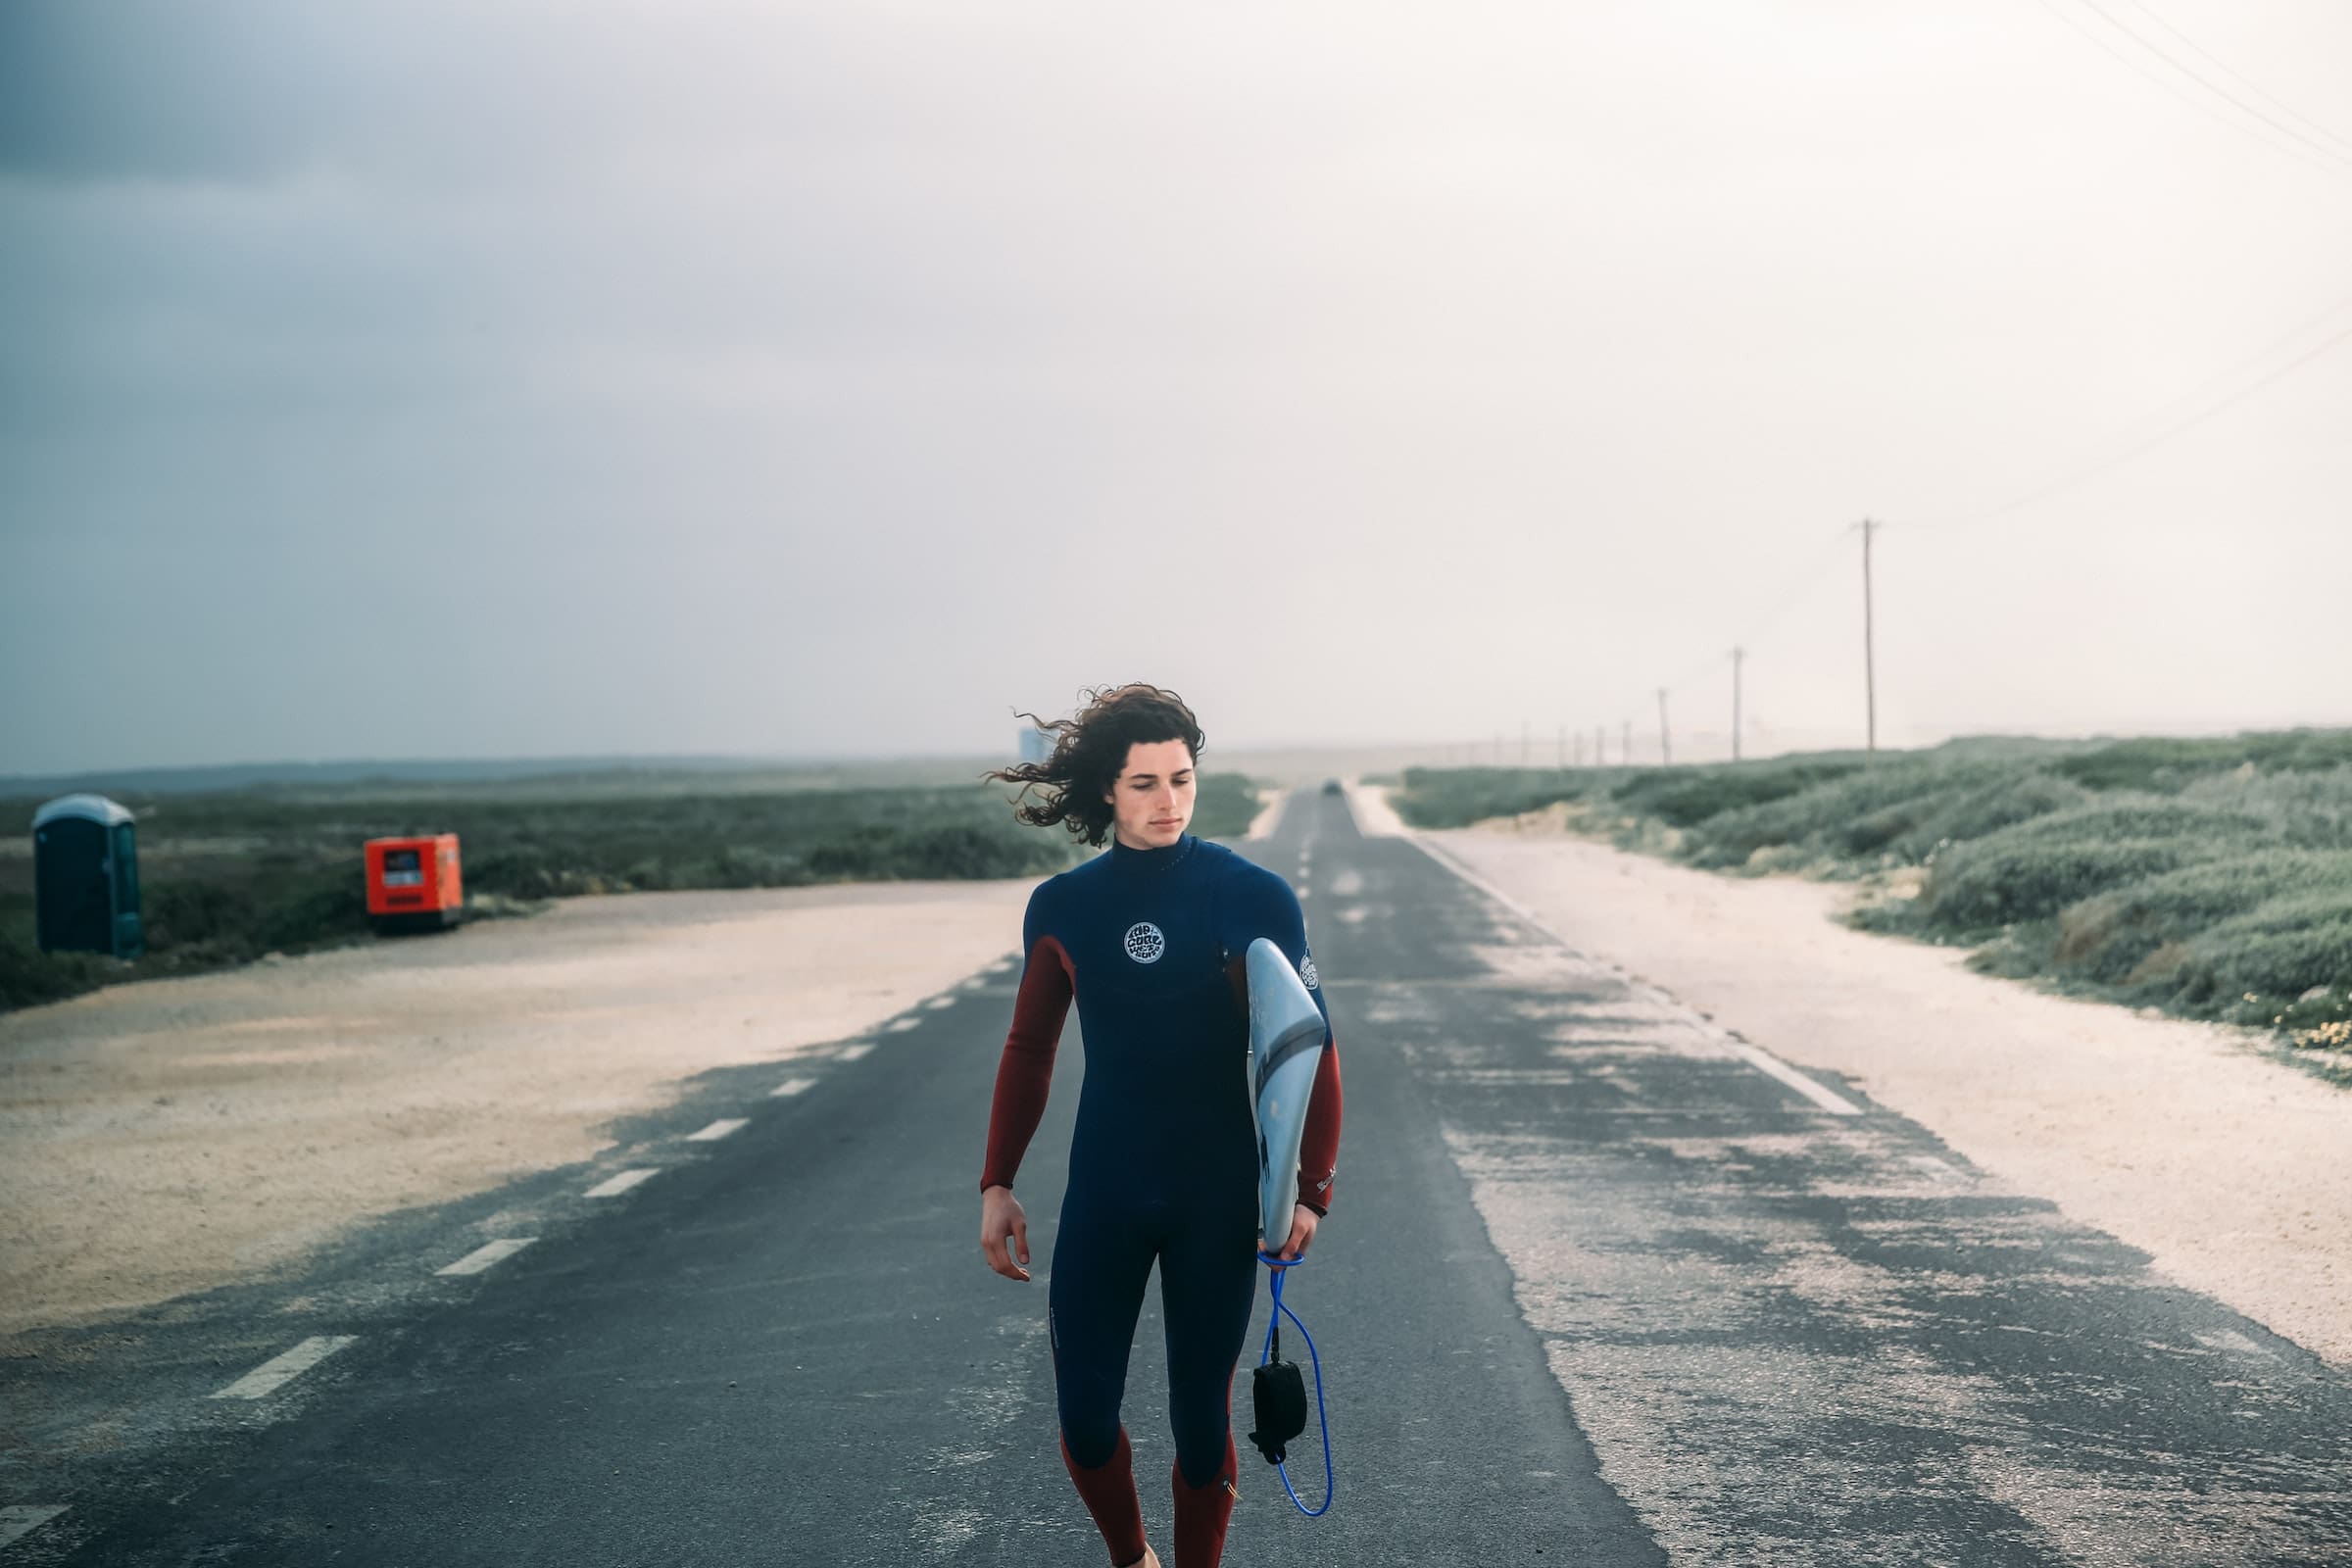 A man wearing a wetsuit on the beach